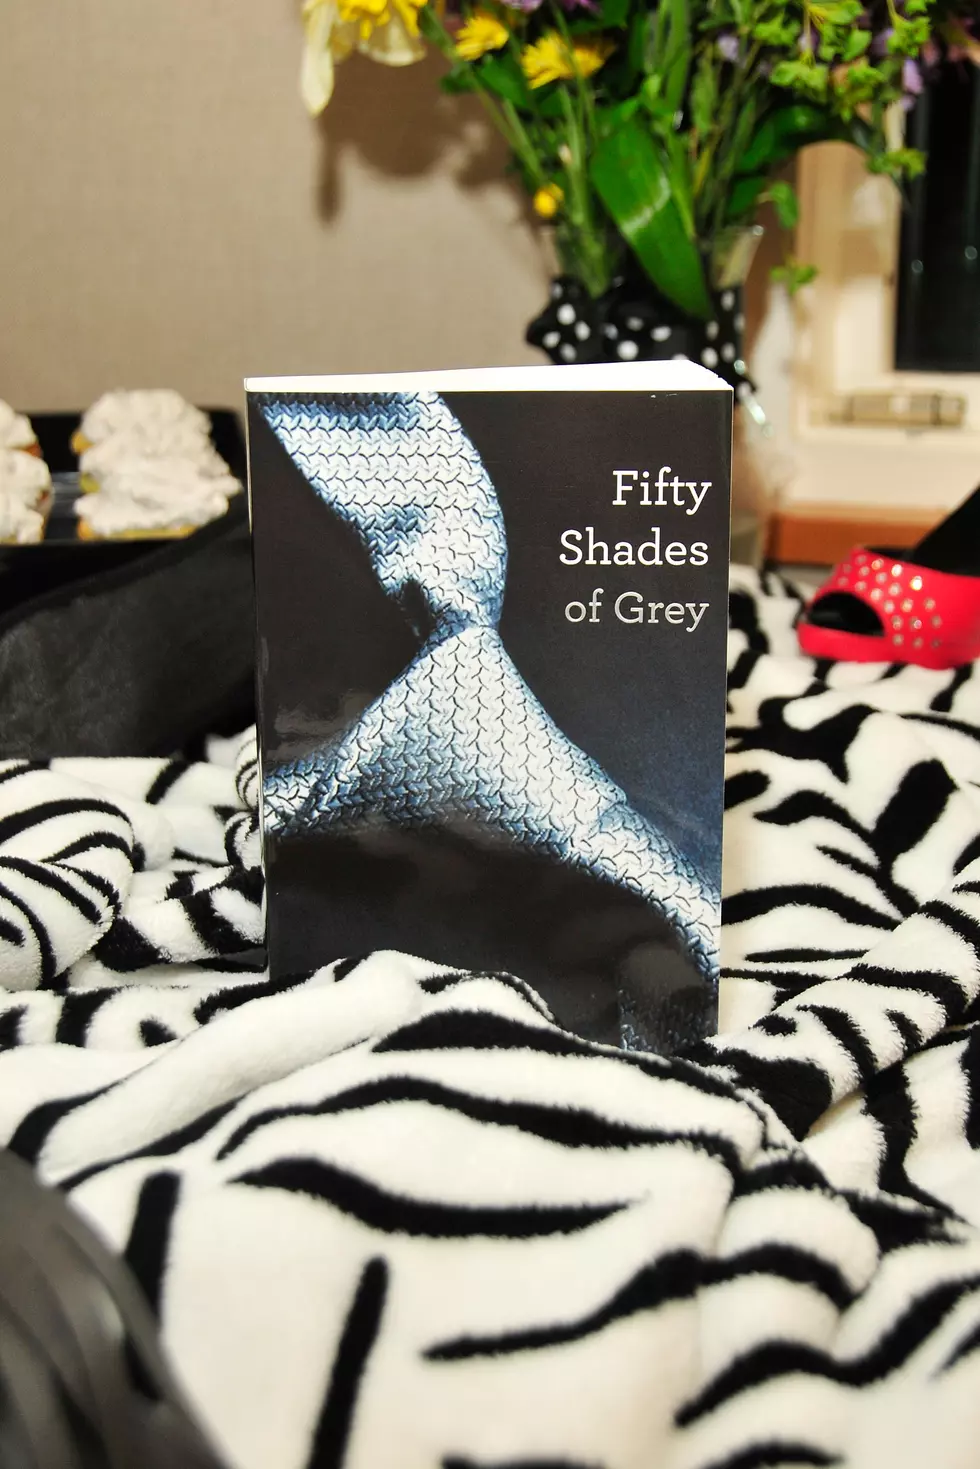 New ‘Fifty Shades of Grey’ Book!